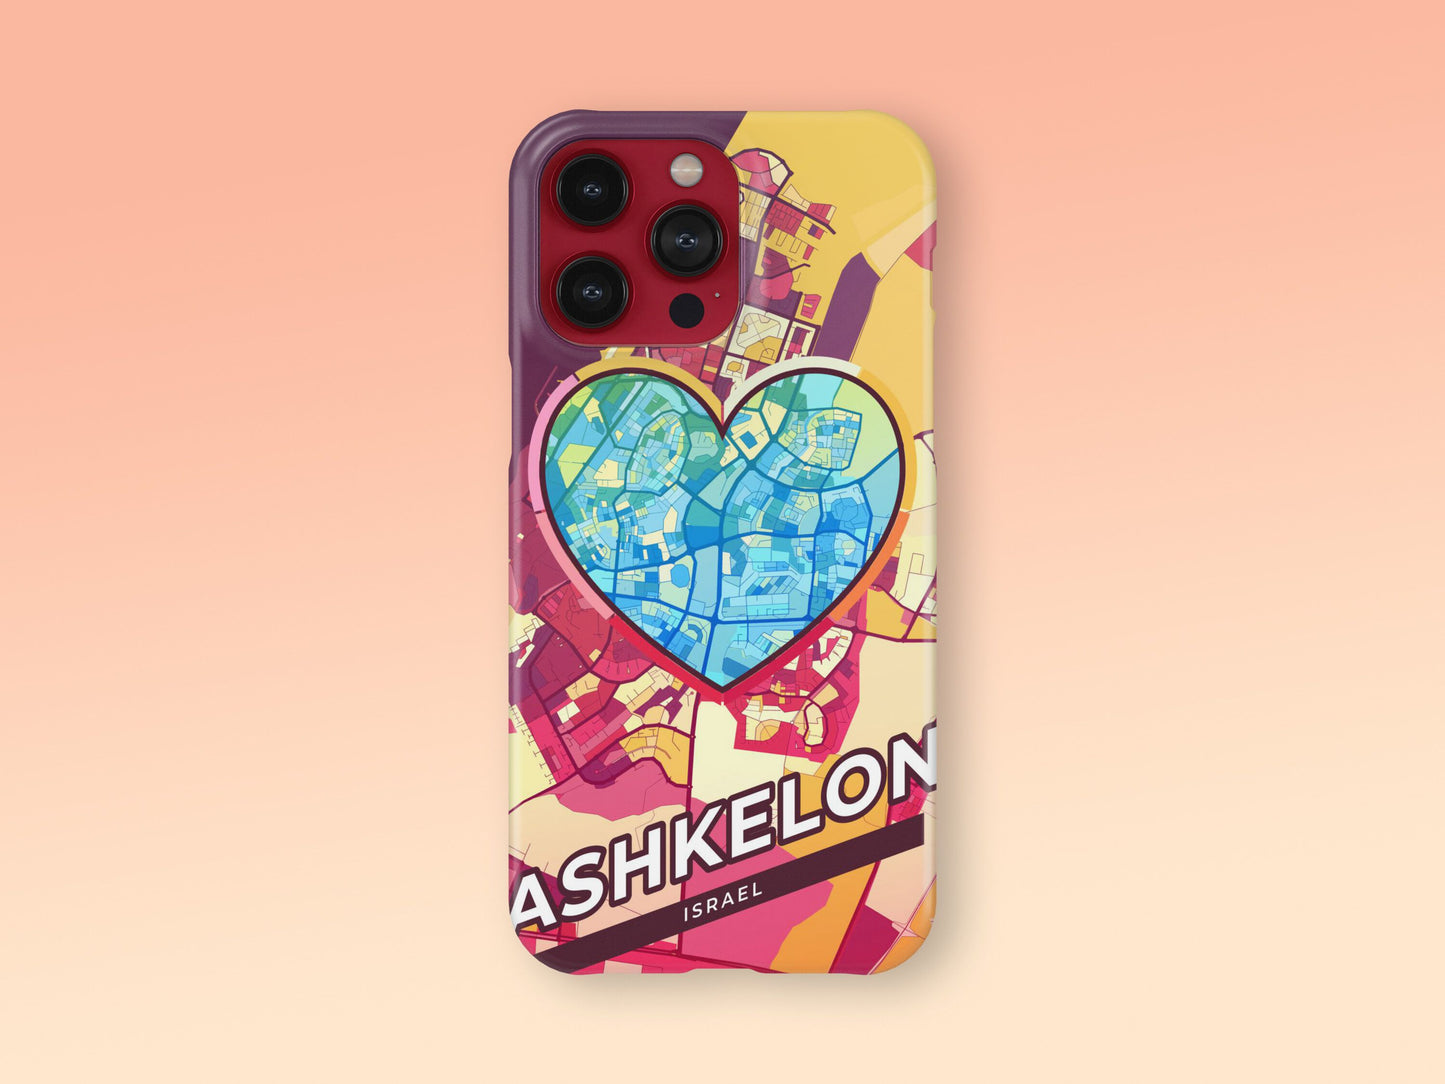 Ashkelon Israel slim phone case with colorful icon. Birthday, wedding or housewarming gift. Couple match cases. 2